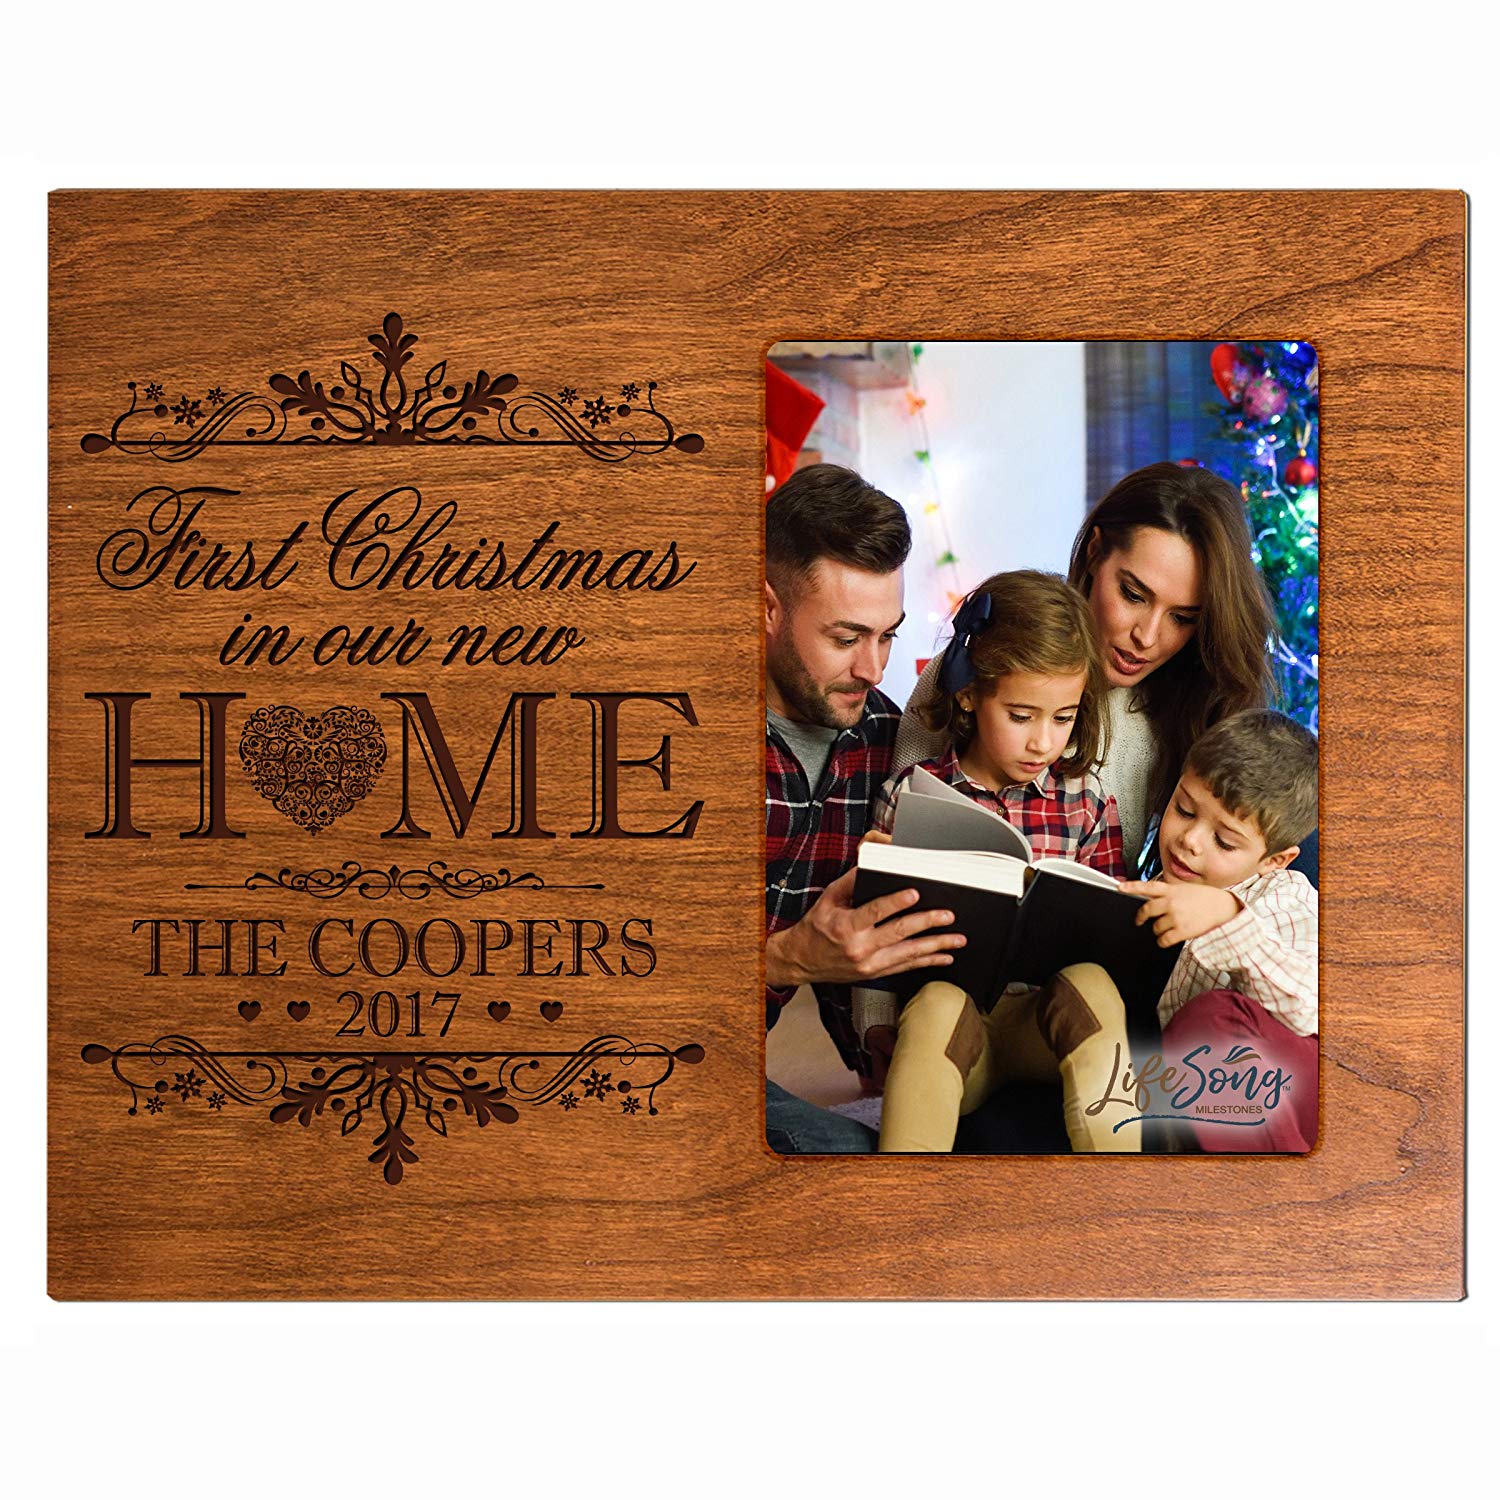 Personalized Home Christmas photo frame holds 4x6 photograph In Our New Home - LifeSong Milestones